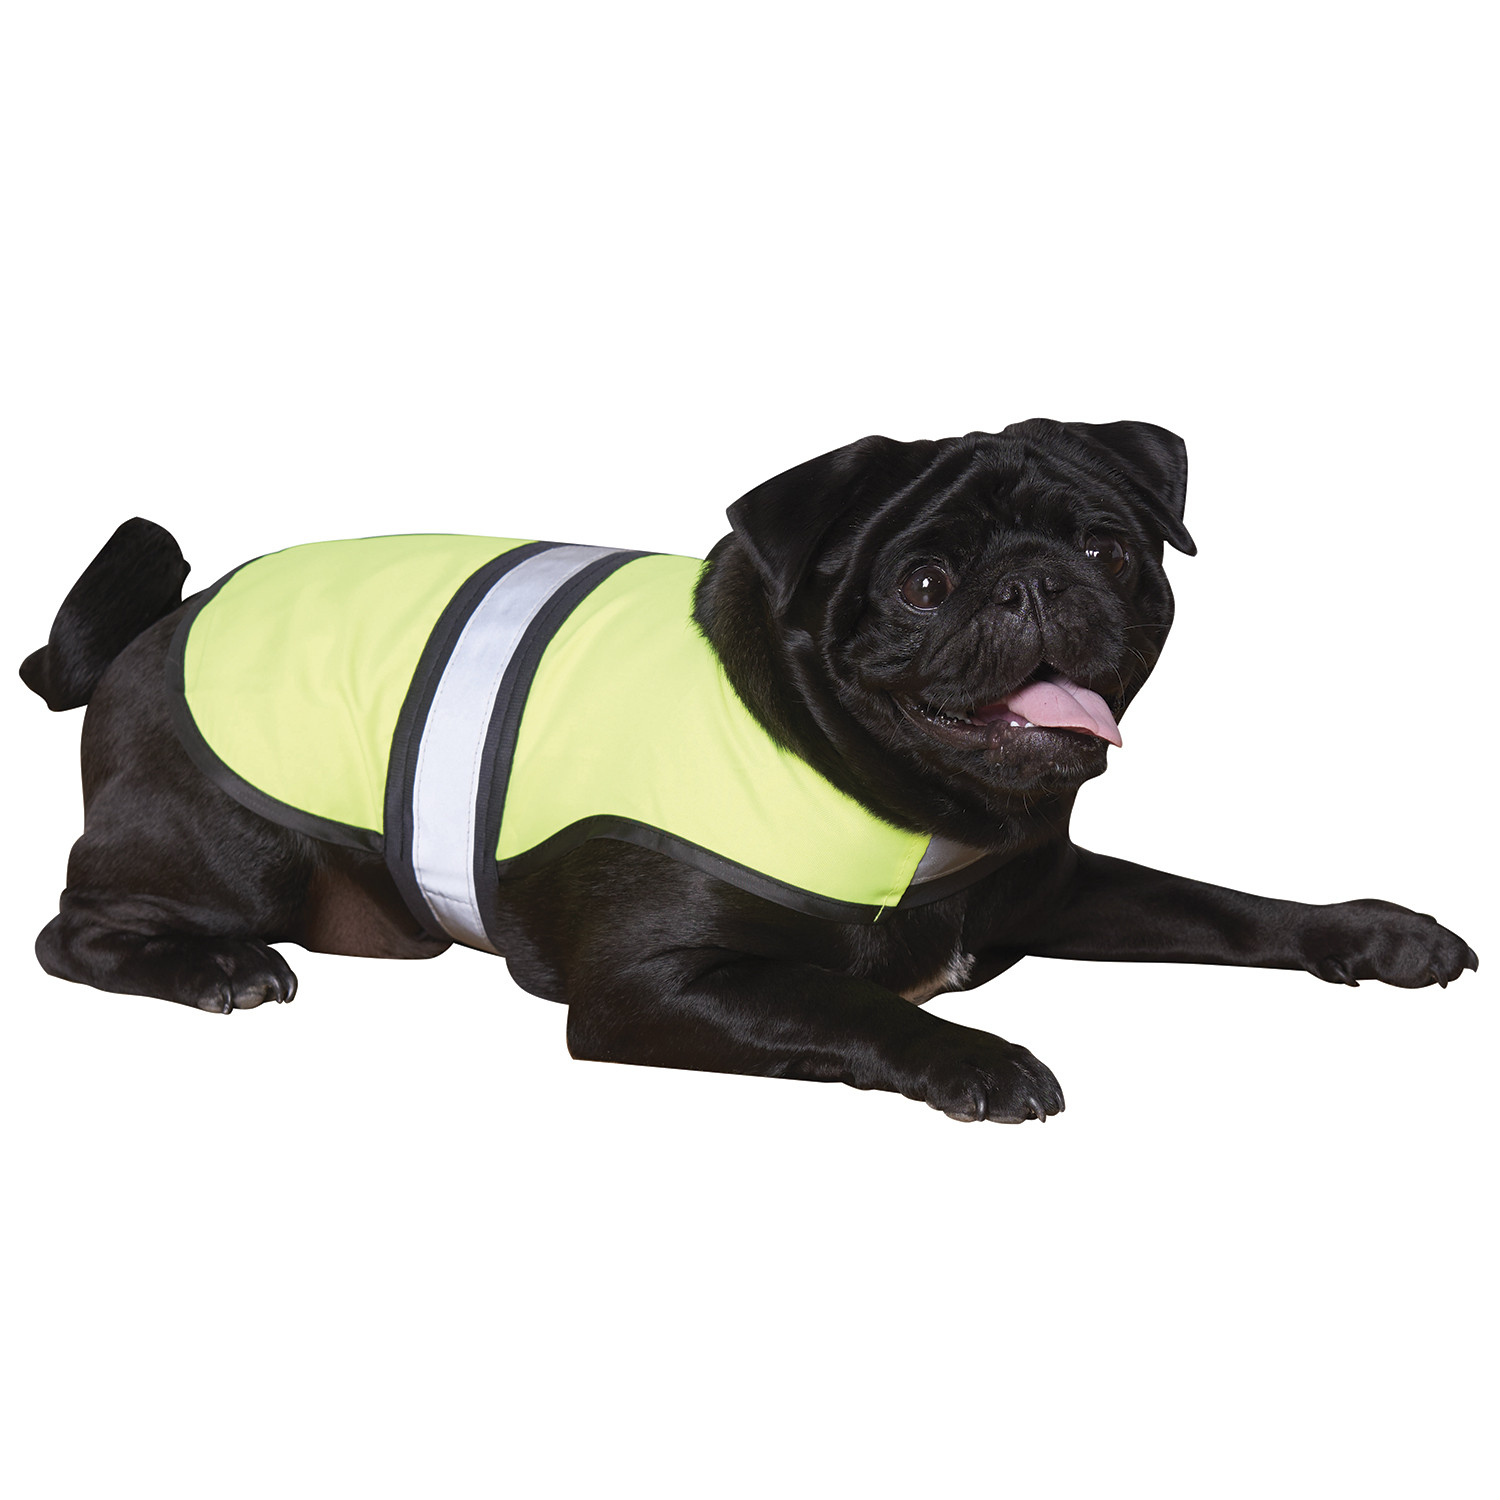 Lightweight High Visibility Gilet - S Image 2